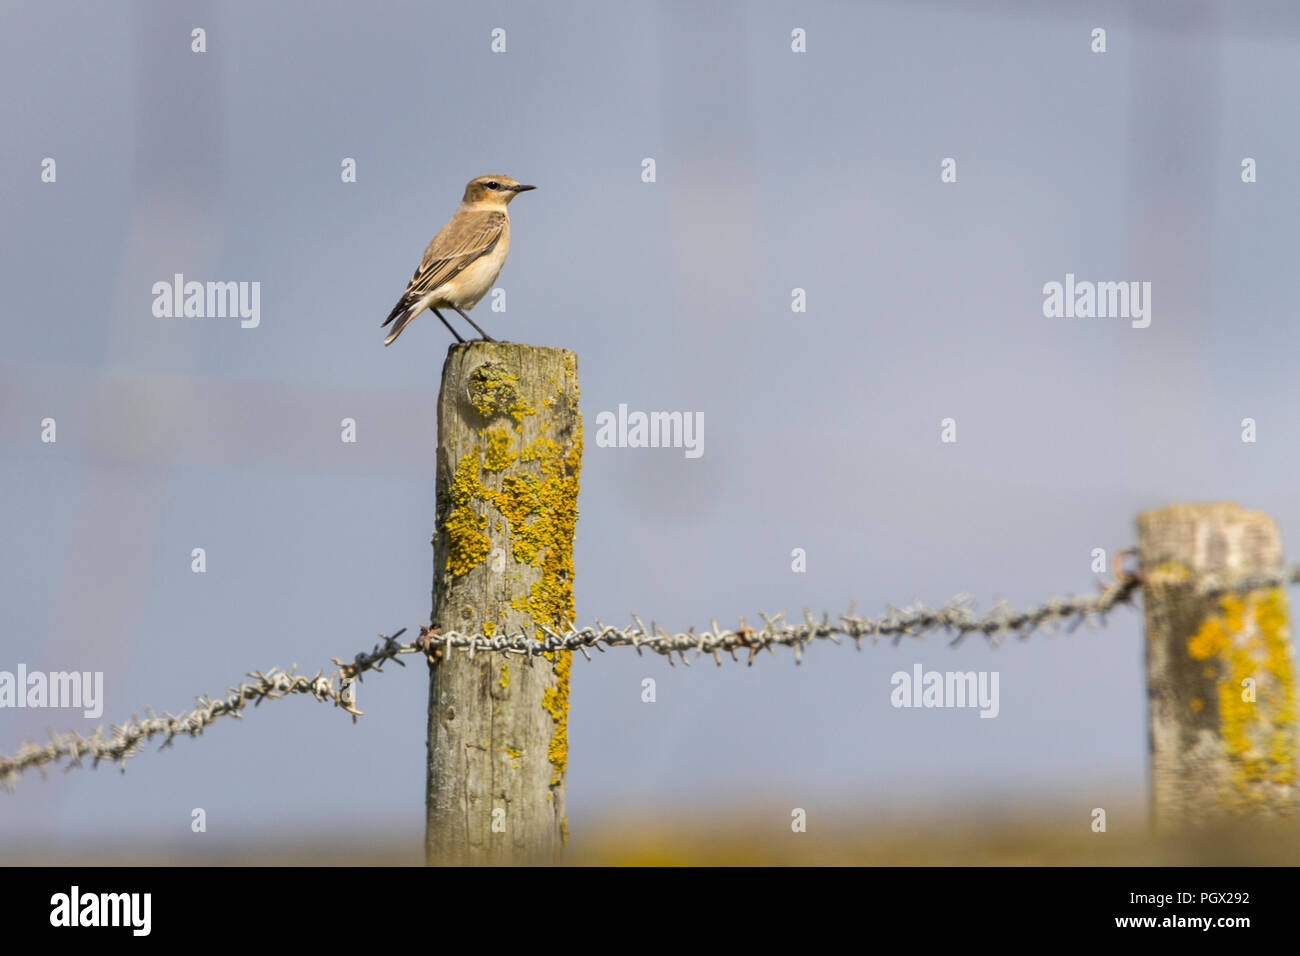 Wheatear (Oenanthe oenanthe) perched on wooden fence post at Seaford UK. A summer migrant with pale stripe over eye female plumage. Stock Photo